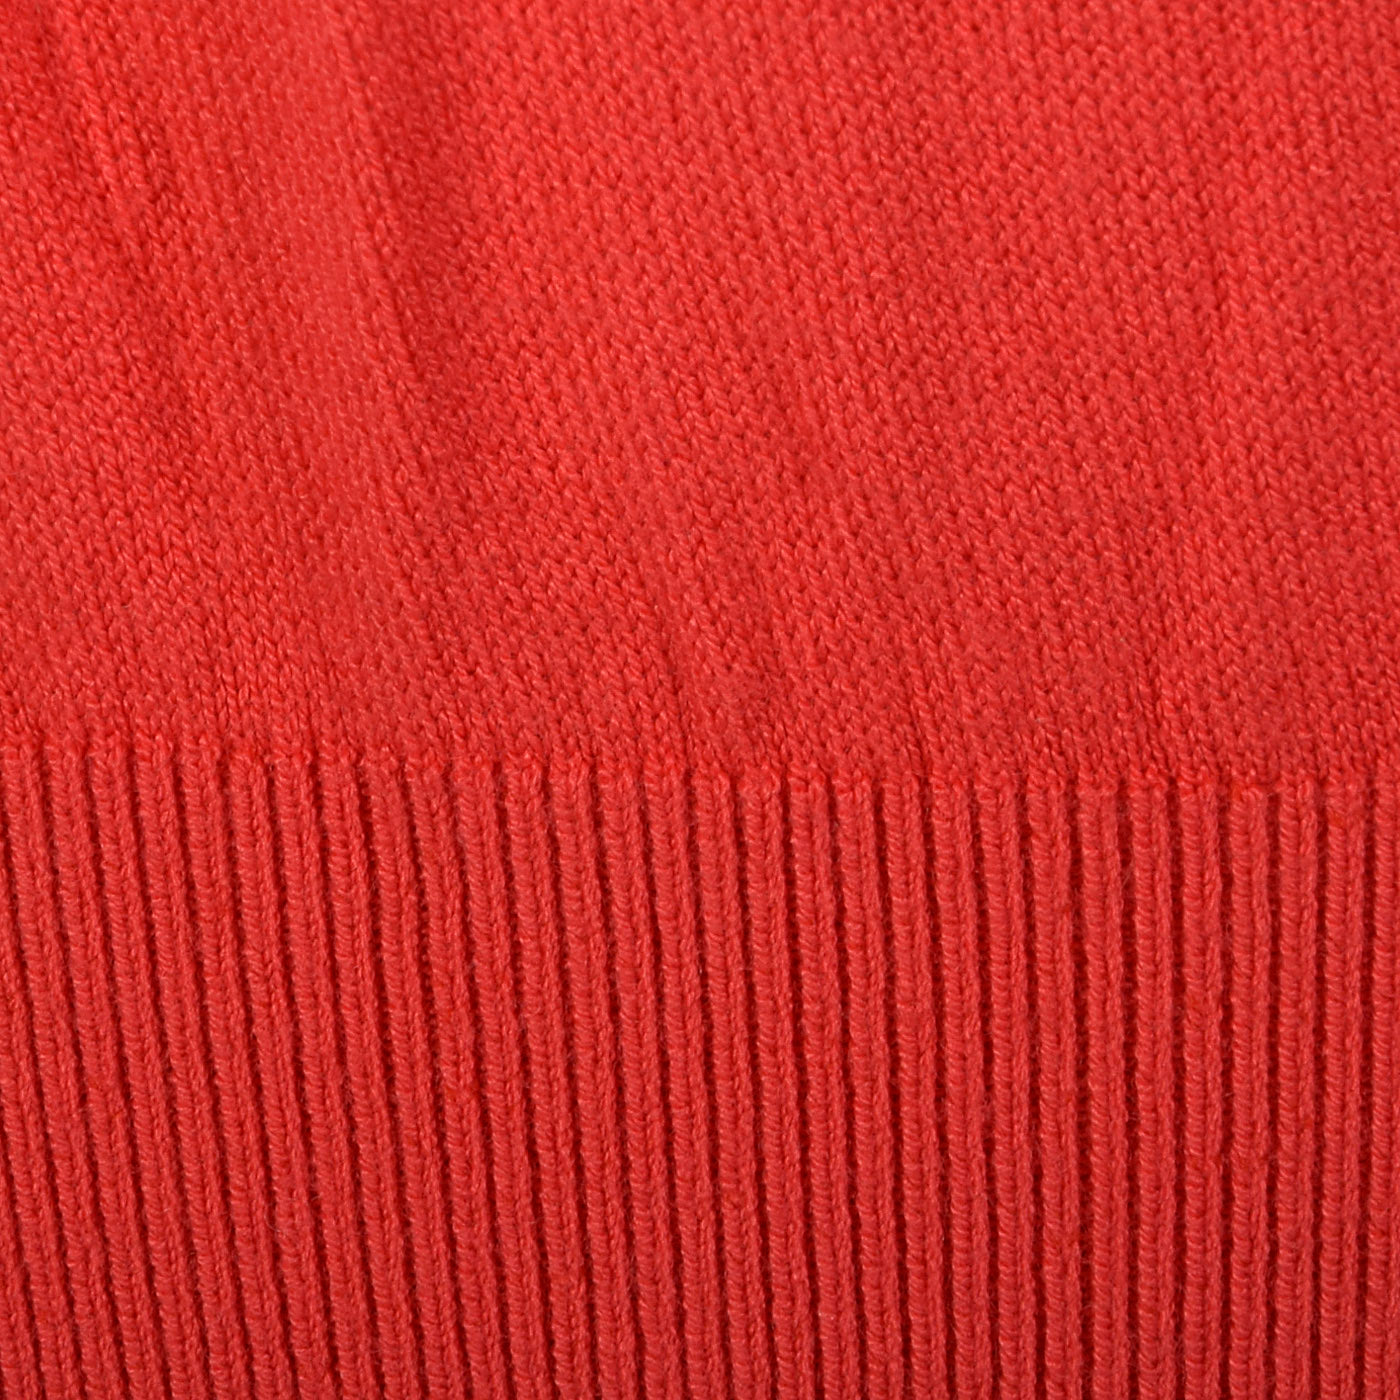 2000s Red Knit Top